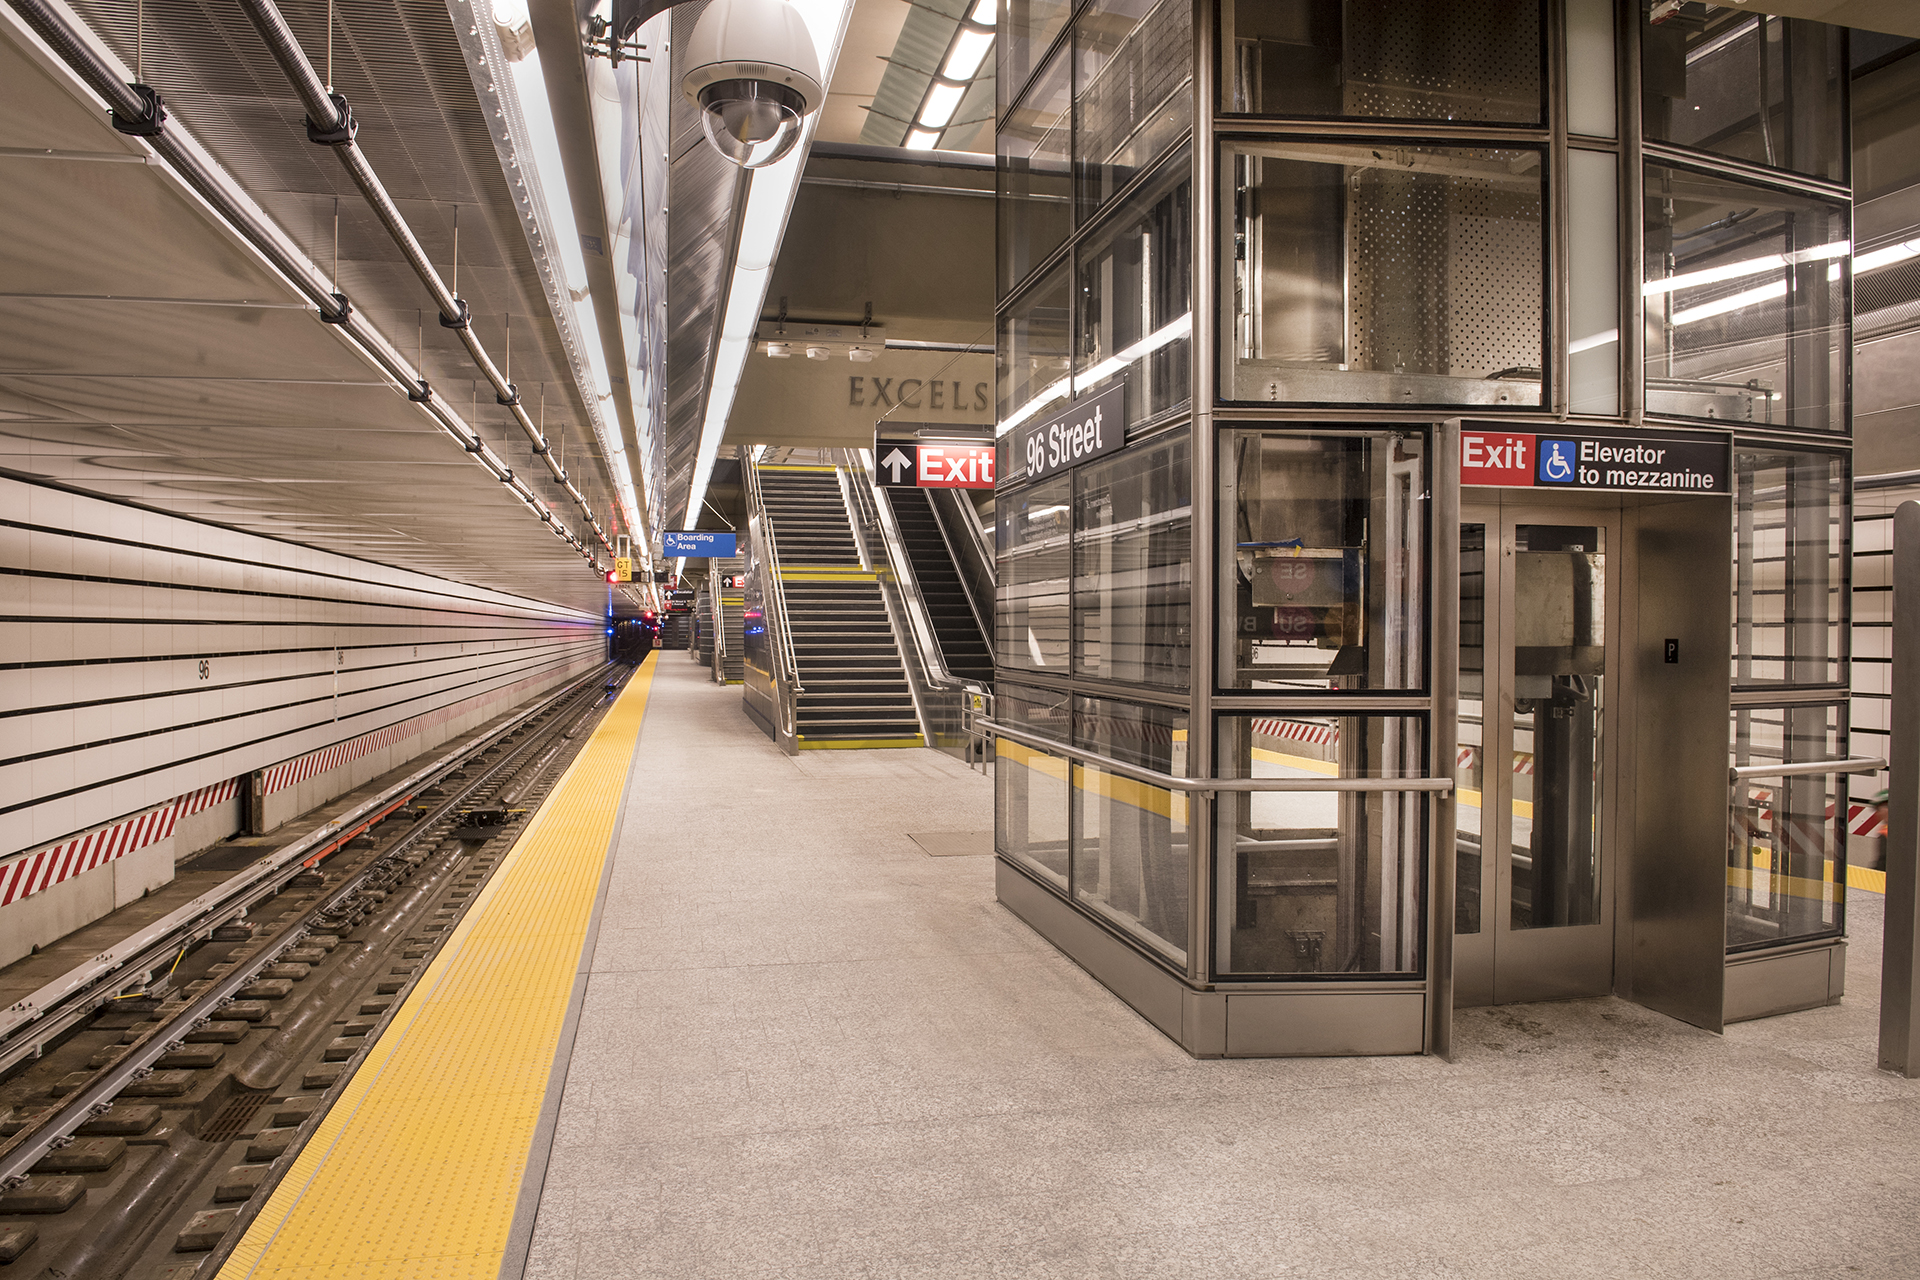 View of elevator at platform level in 96th Street station on Second Avenue subway line.